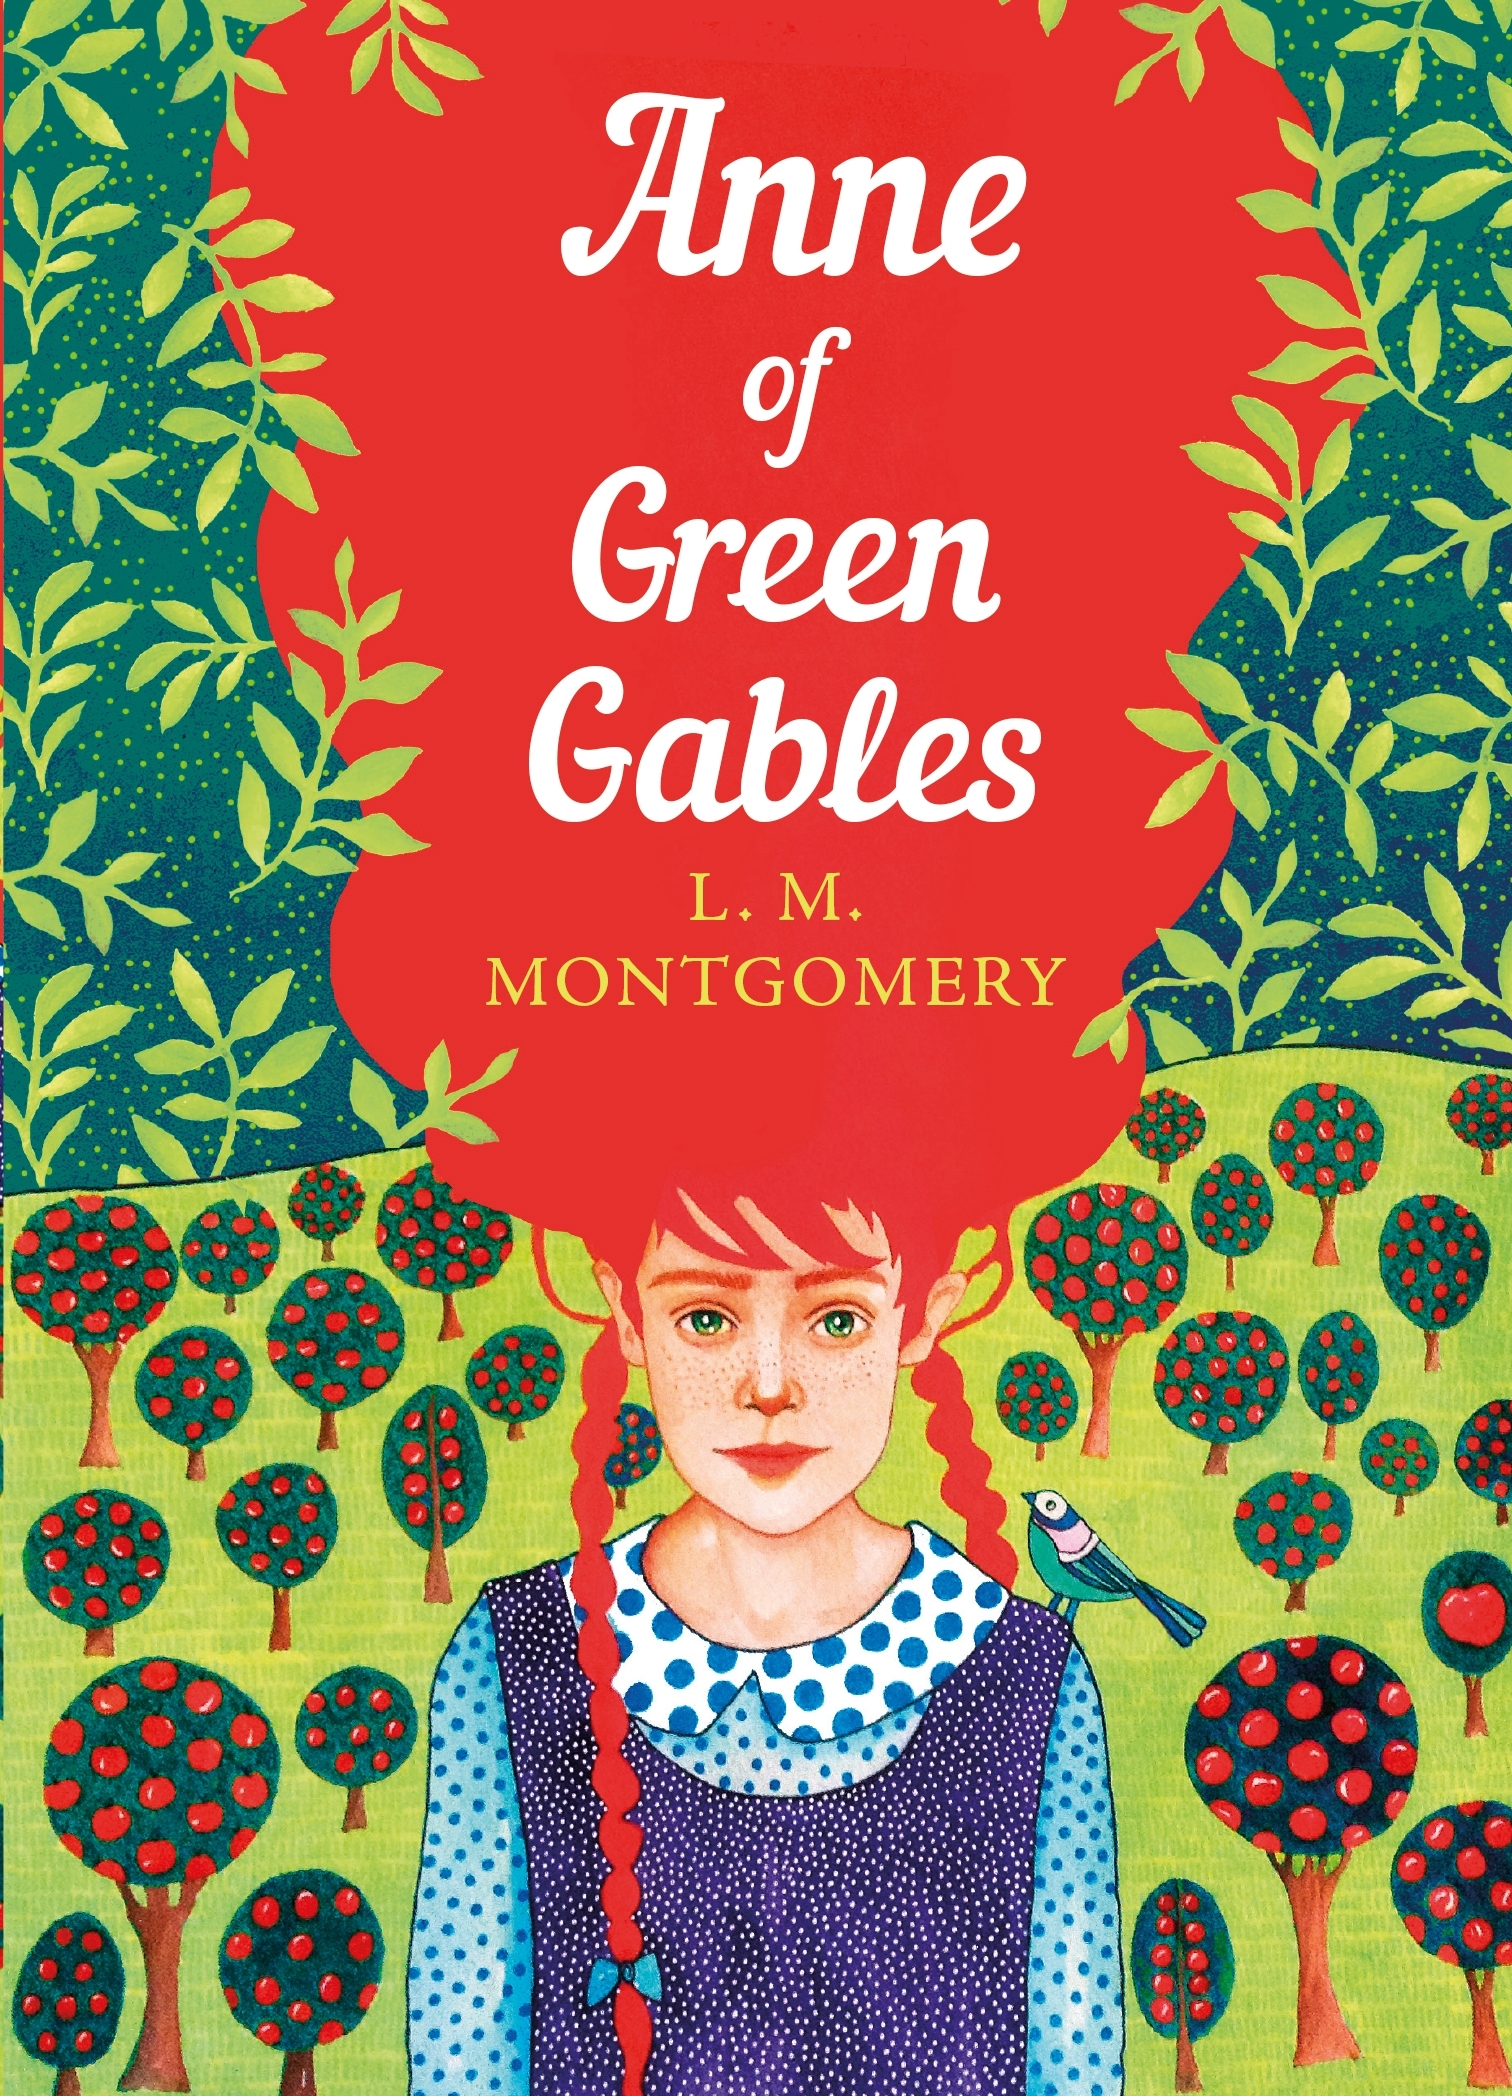 anne of green gables book report ideas